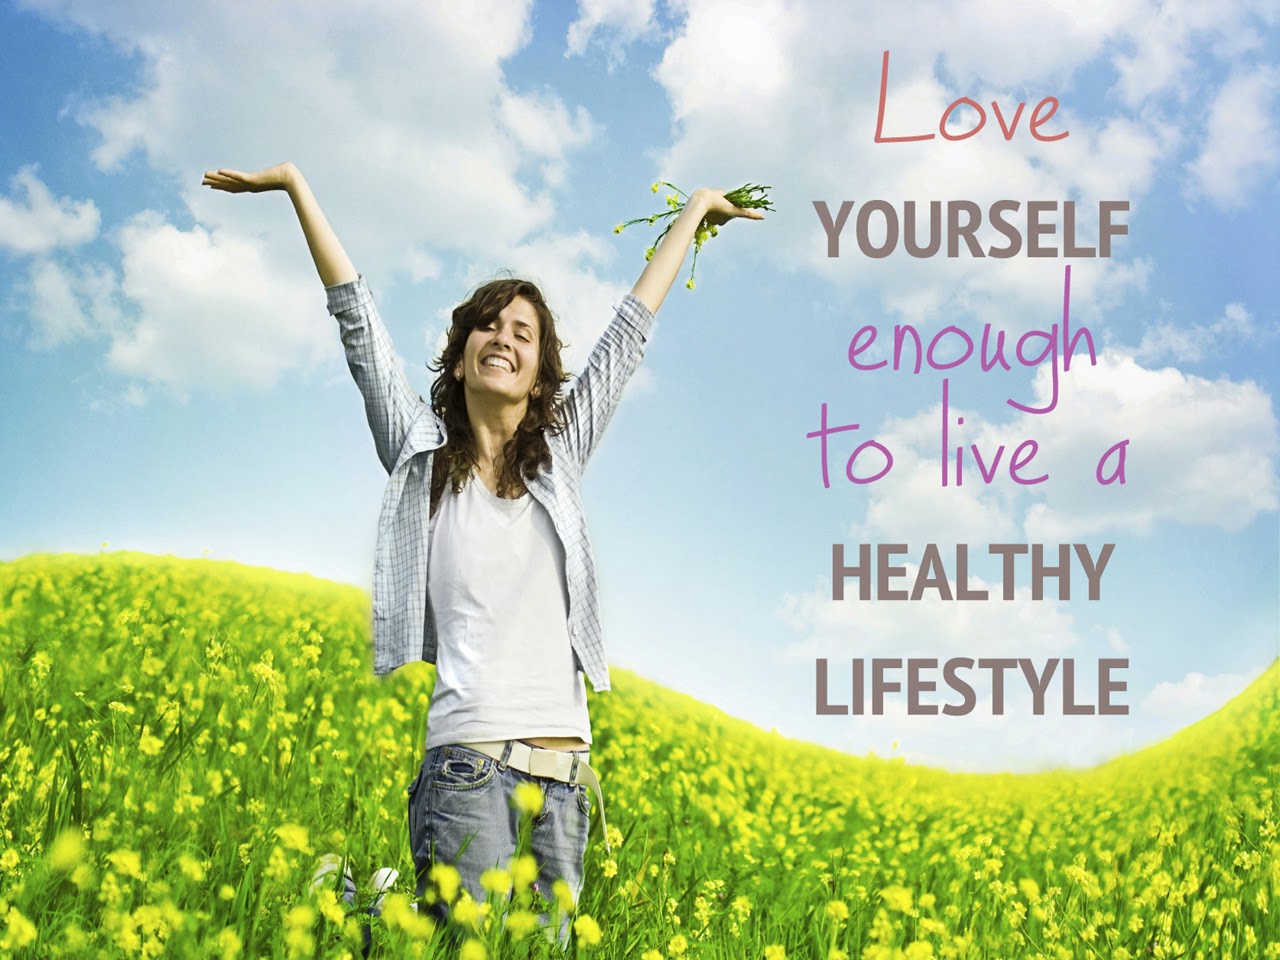 Health And Fitness Quotes By Doctors With Images - Poetry ...